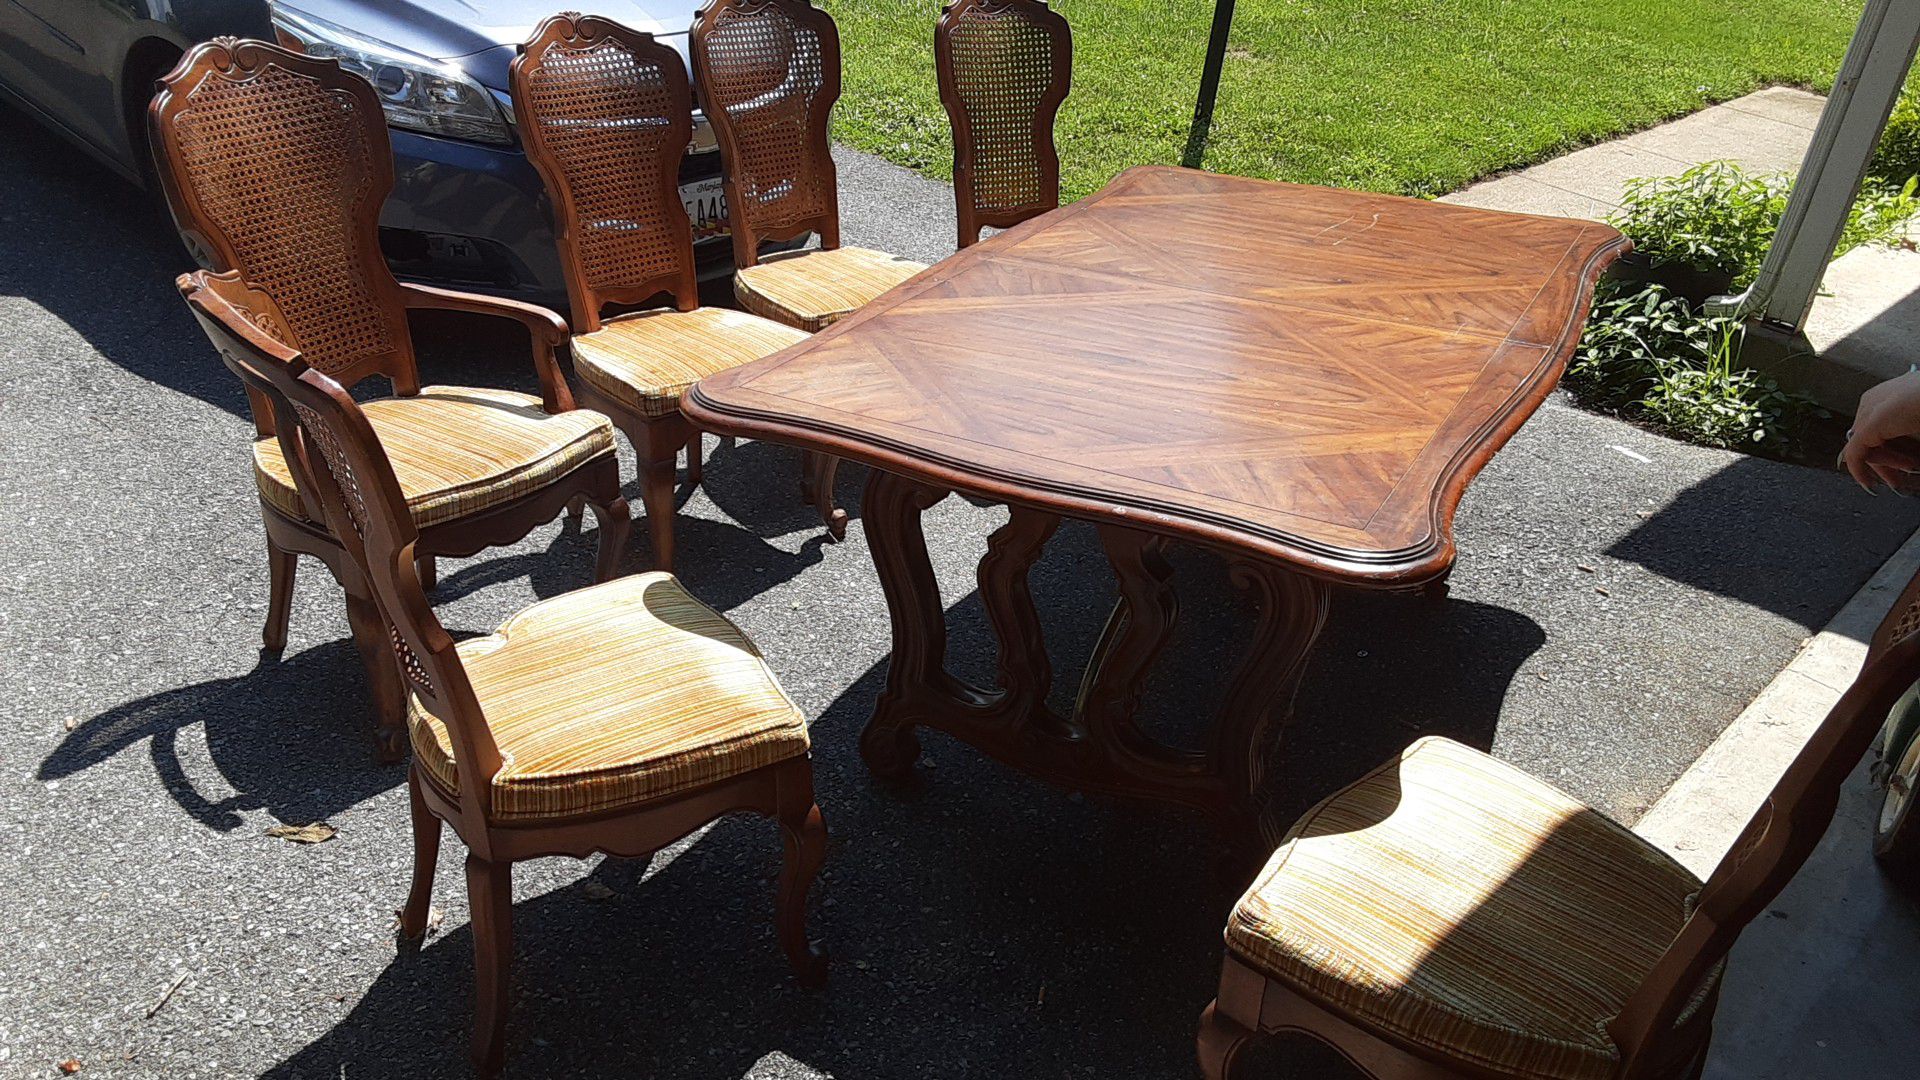 Antique Table and chair set, 6 Chairs with cane backs